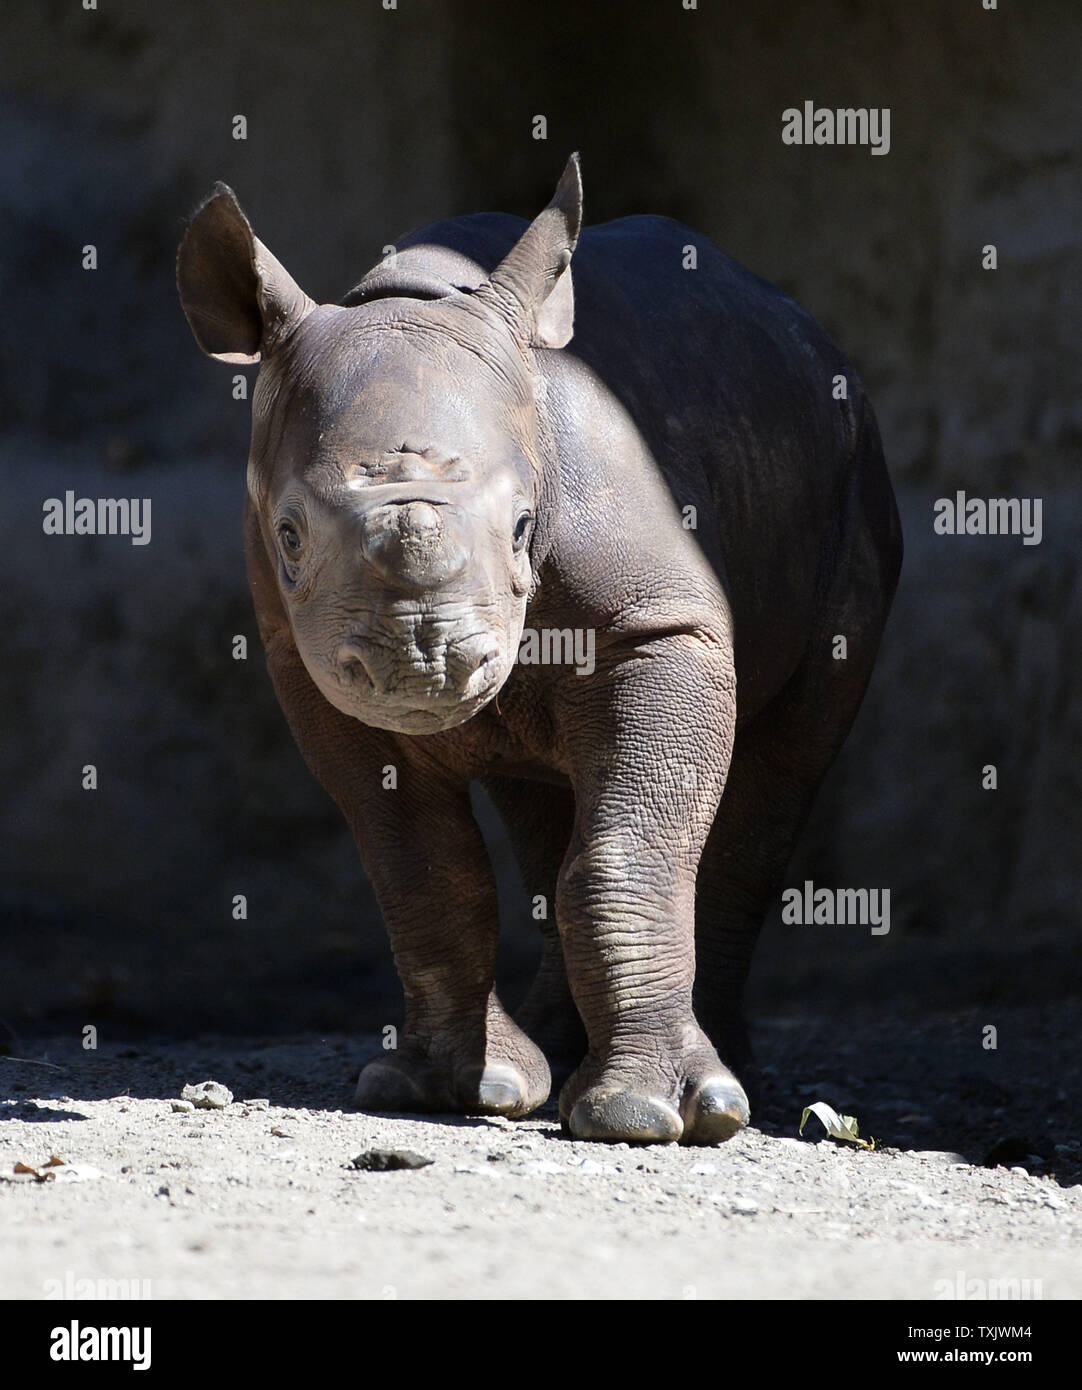 King, a one-month-old eastern black rhinoceros, stands in its habitat at the Lincoln Park Zoo in Chicago on September, 26, 2013. King, who made its public debut on September 17, was born on August 26 and is the first of the species born at the zoo since 1989. The eastern black rhinoceros is an endangered species with only 5,000 surviving in the wild.    UPI/Brian Kersey Stock Photo